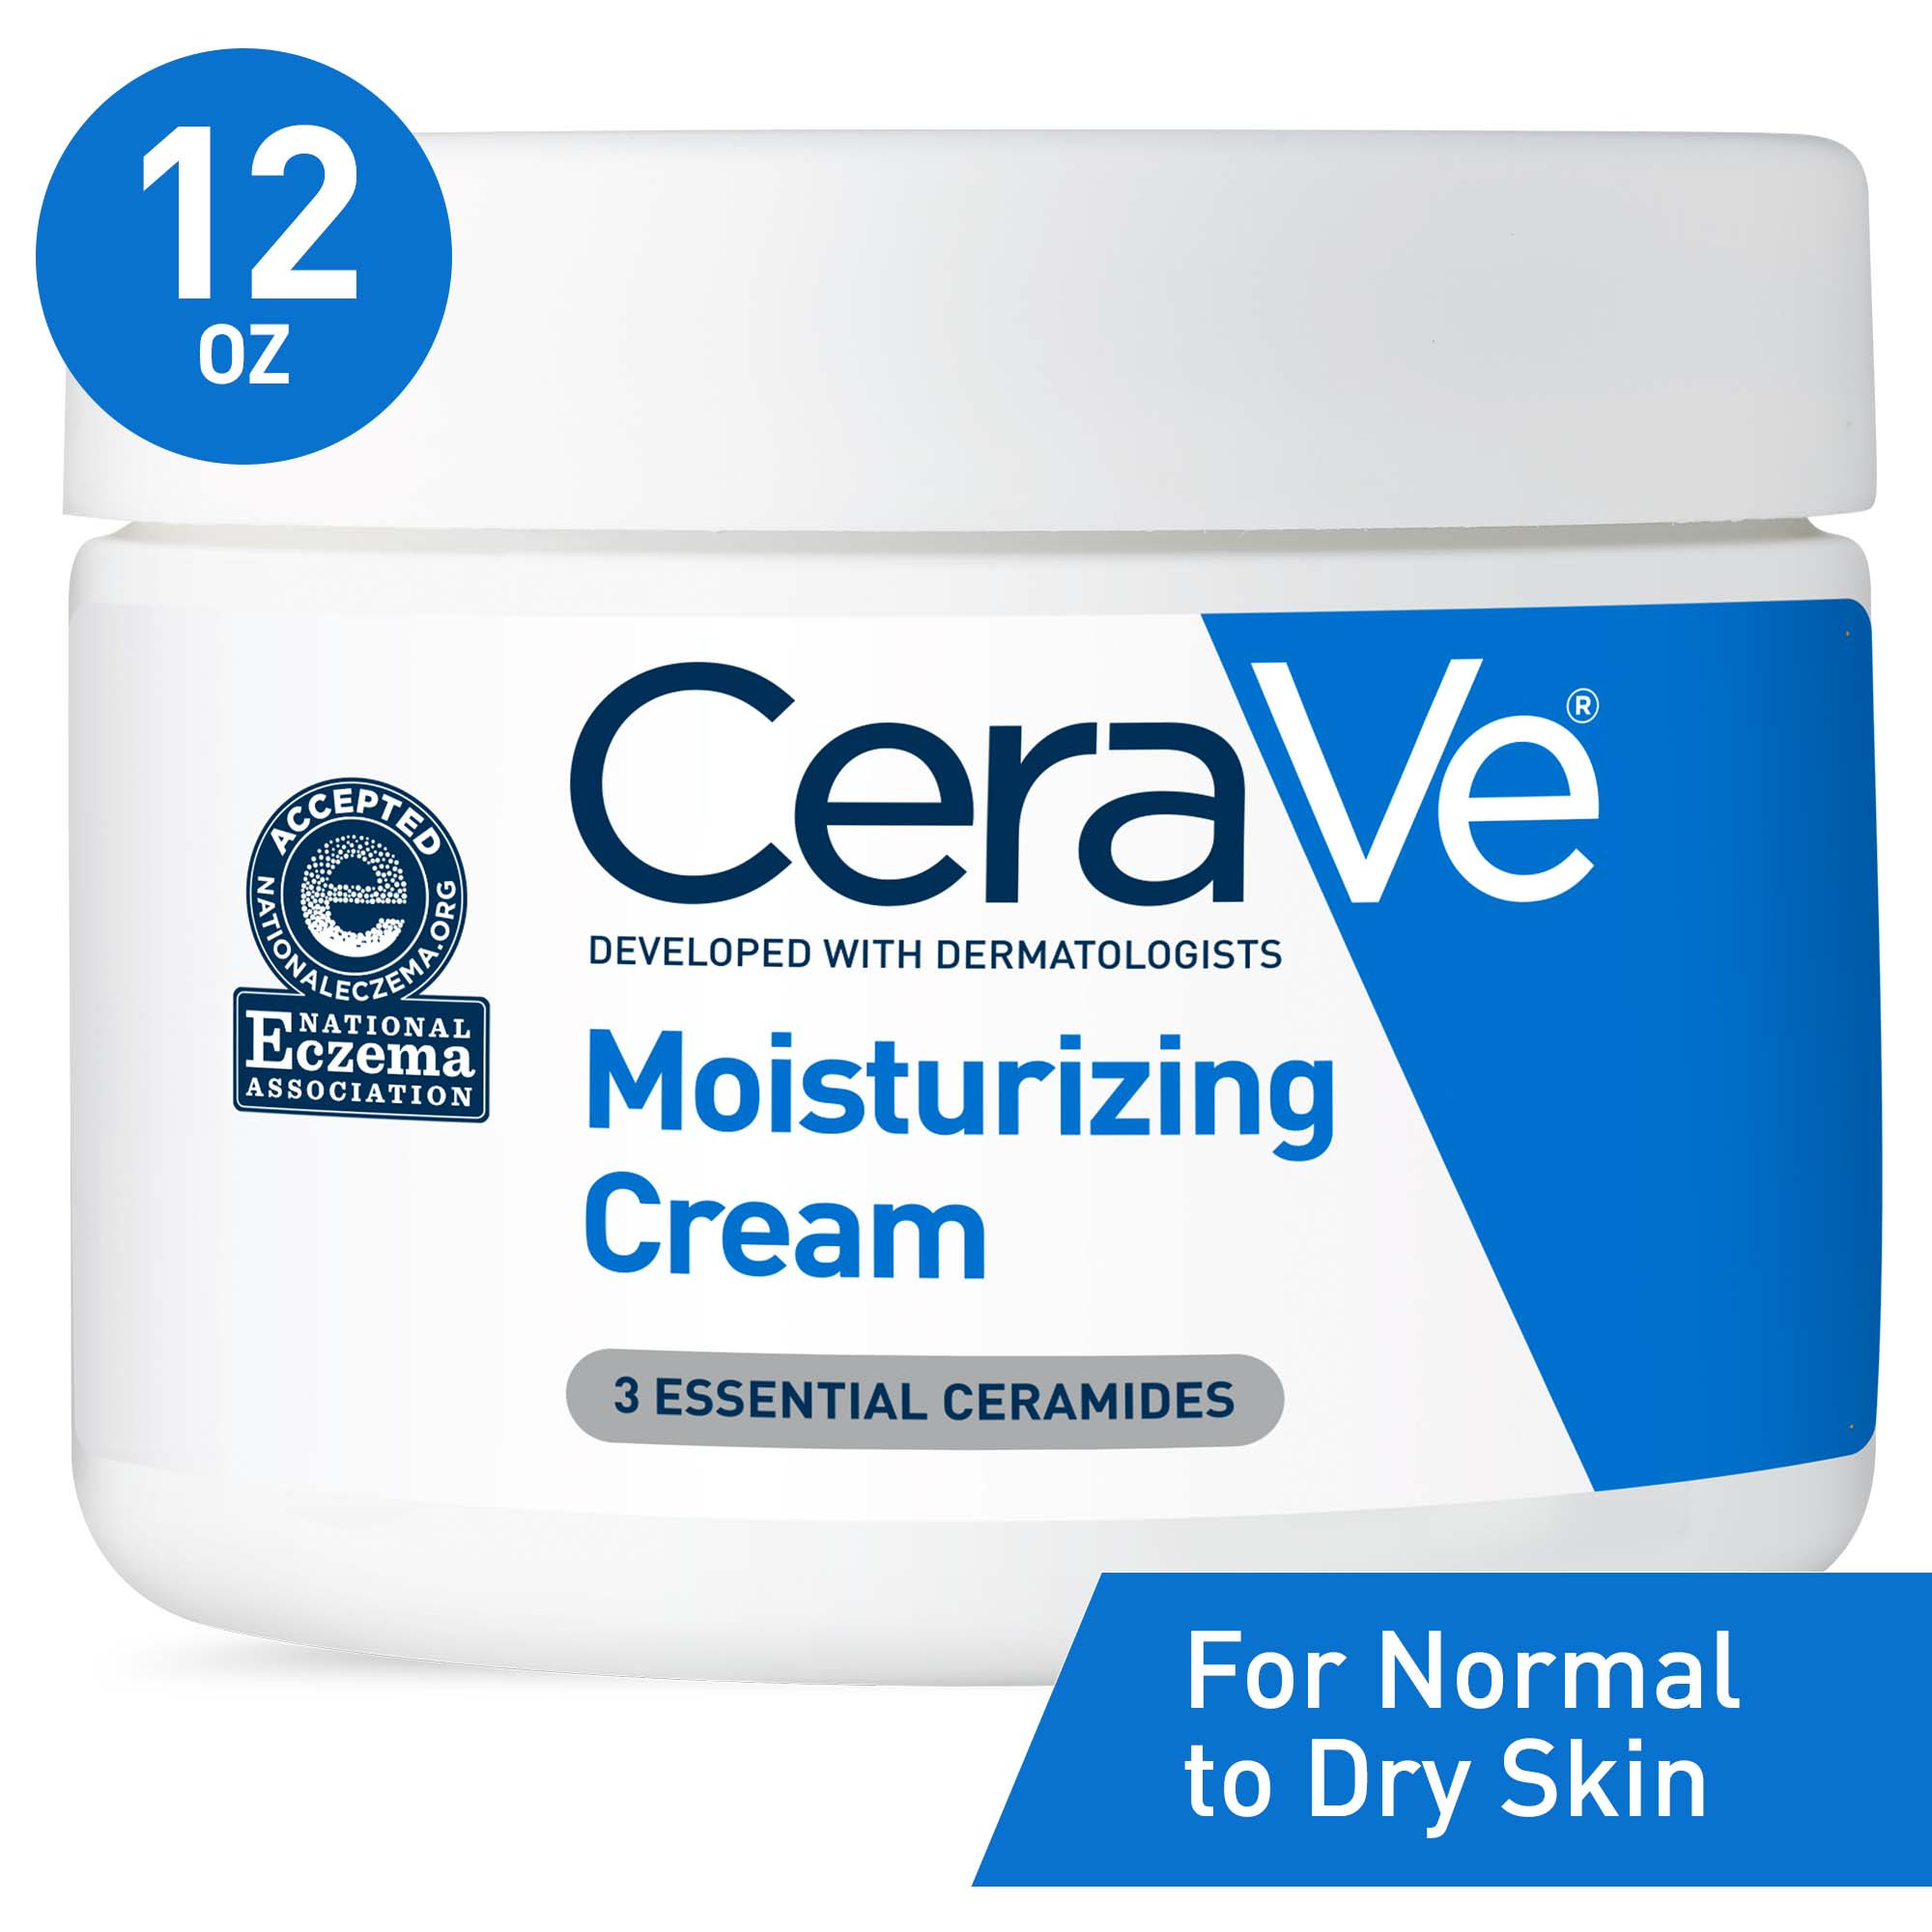 CeraVe Moisturizing Cream, Face & Body Moisturizer for Normal to Very Dry Skin, 12 oz - image 1 of 13